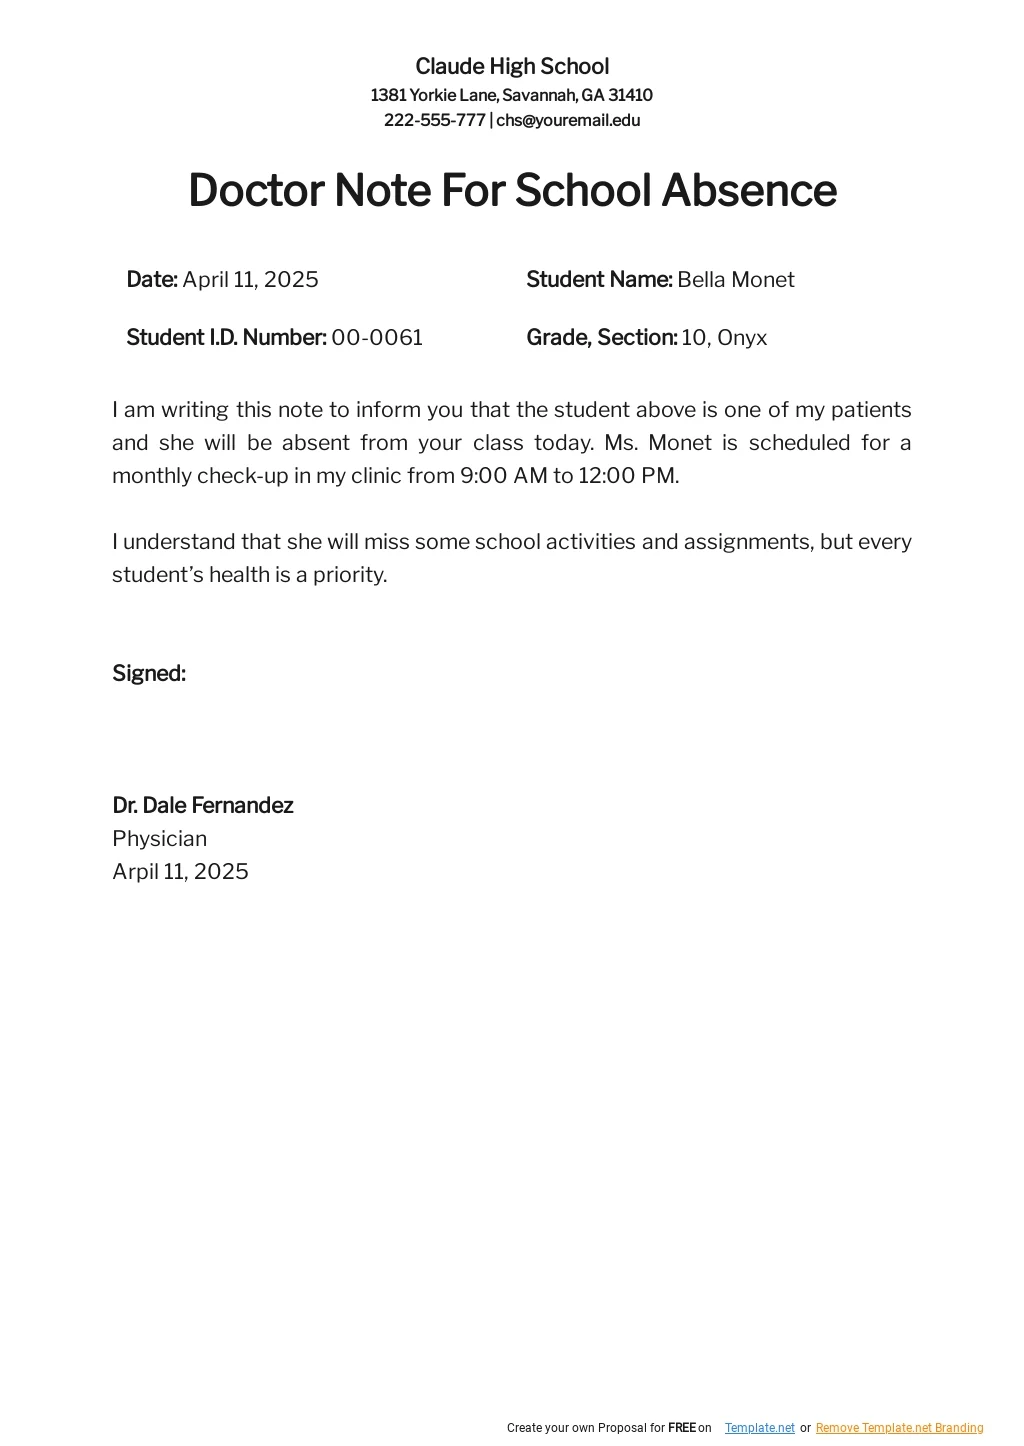 doctor note for school absence template